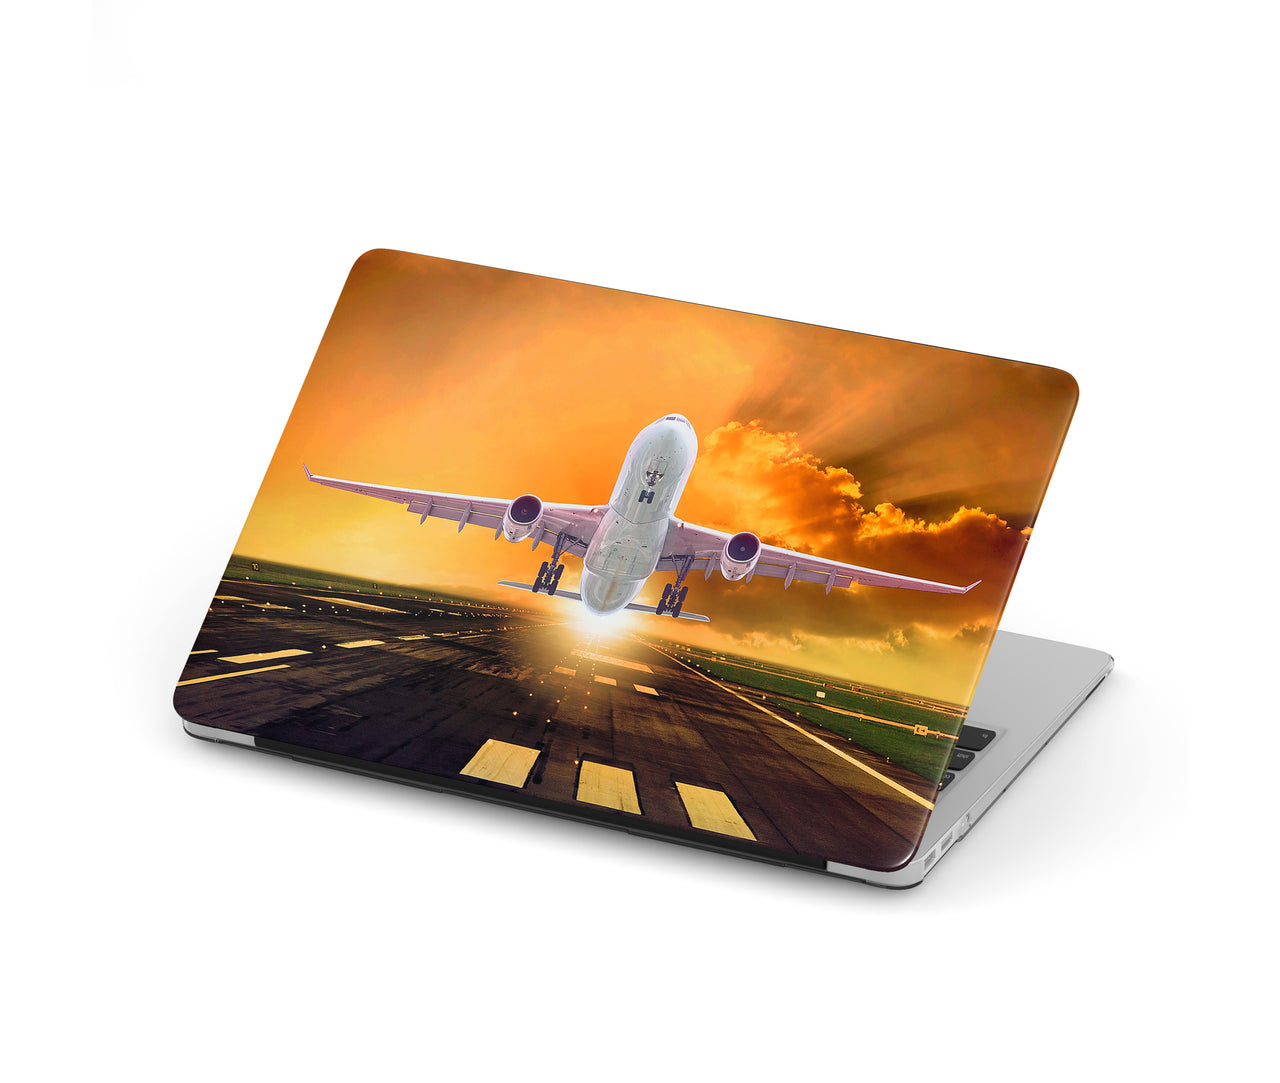 Amazing Departing Aircraft Sunset & Clouds Behind Designed Macbook Cases